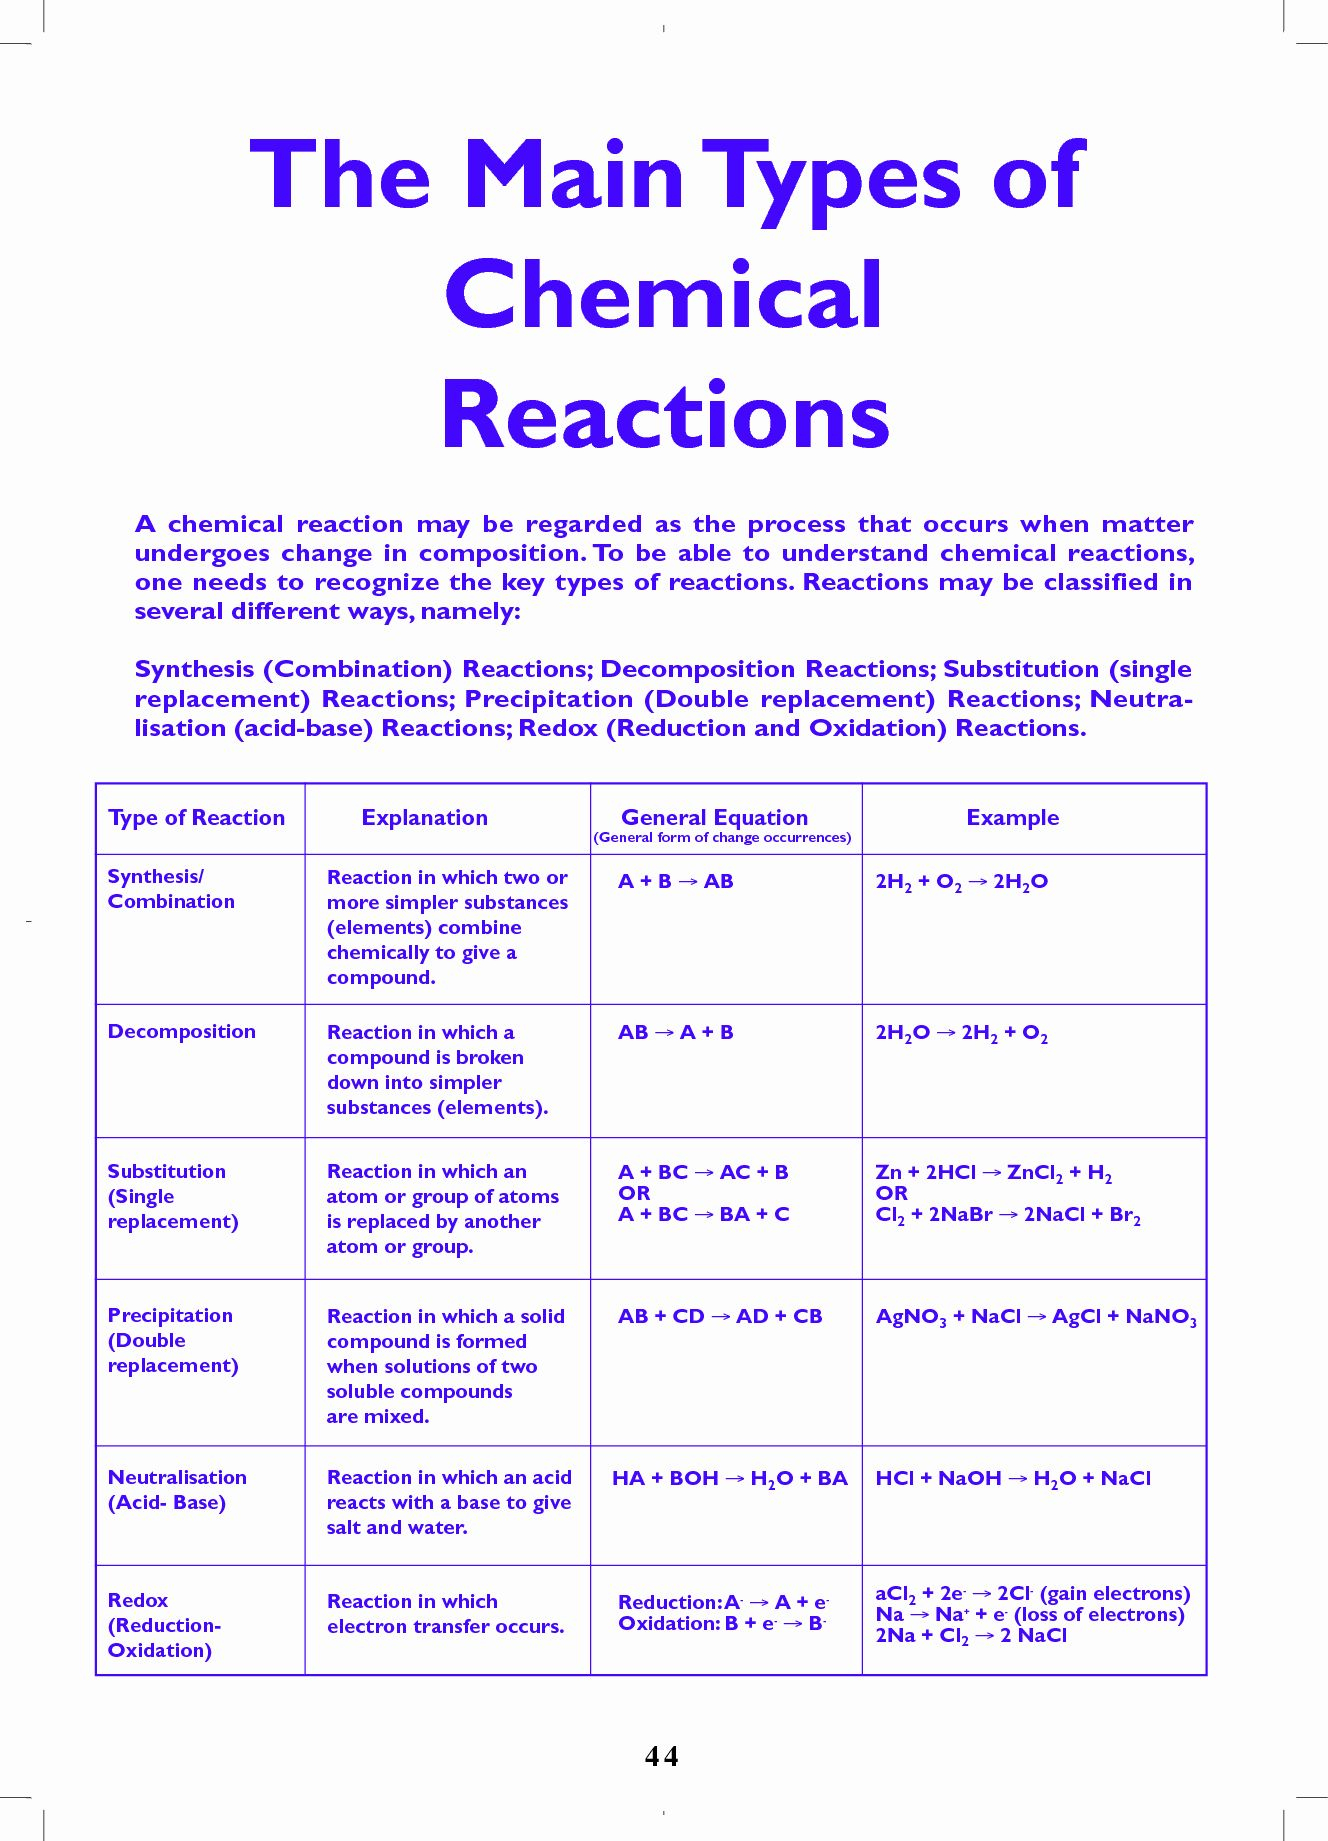 50 Chemical Reactions Types Worksheet In 2020 Chemistry Lessons